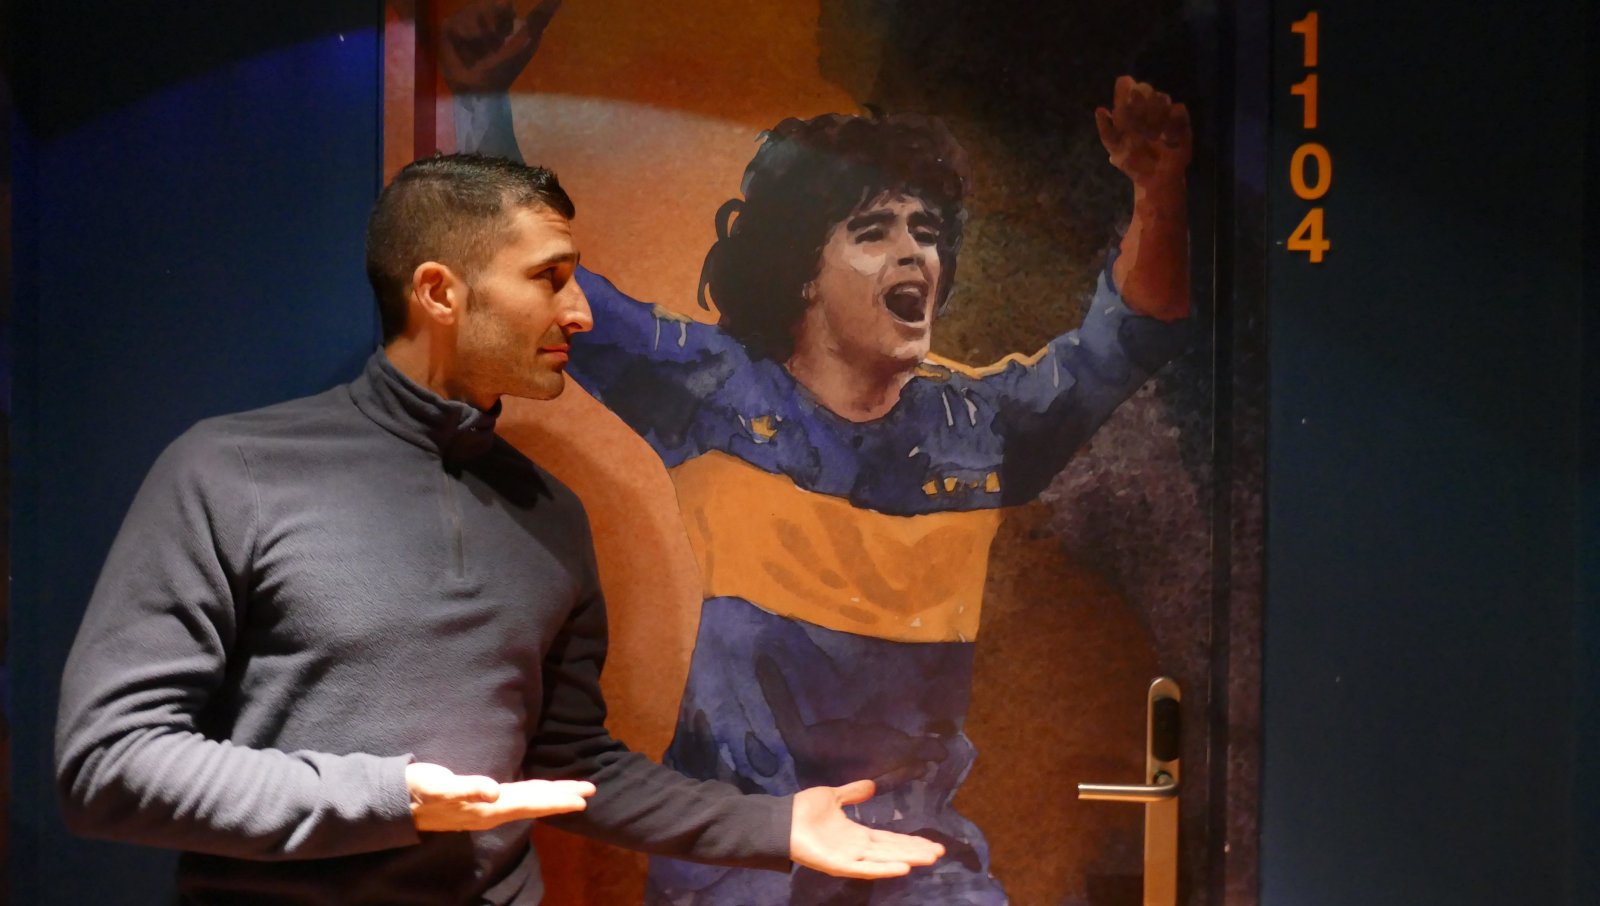 Gay hotels in Buenos Aires - The famous Maradona door at Hotel Boca Juniors in Buenos Aires.